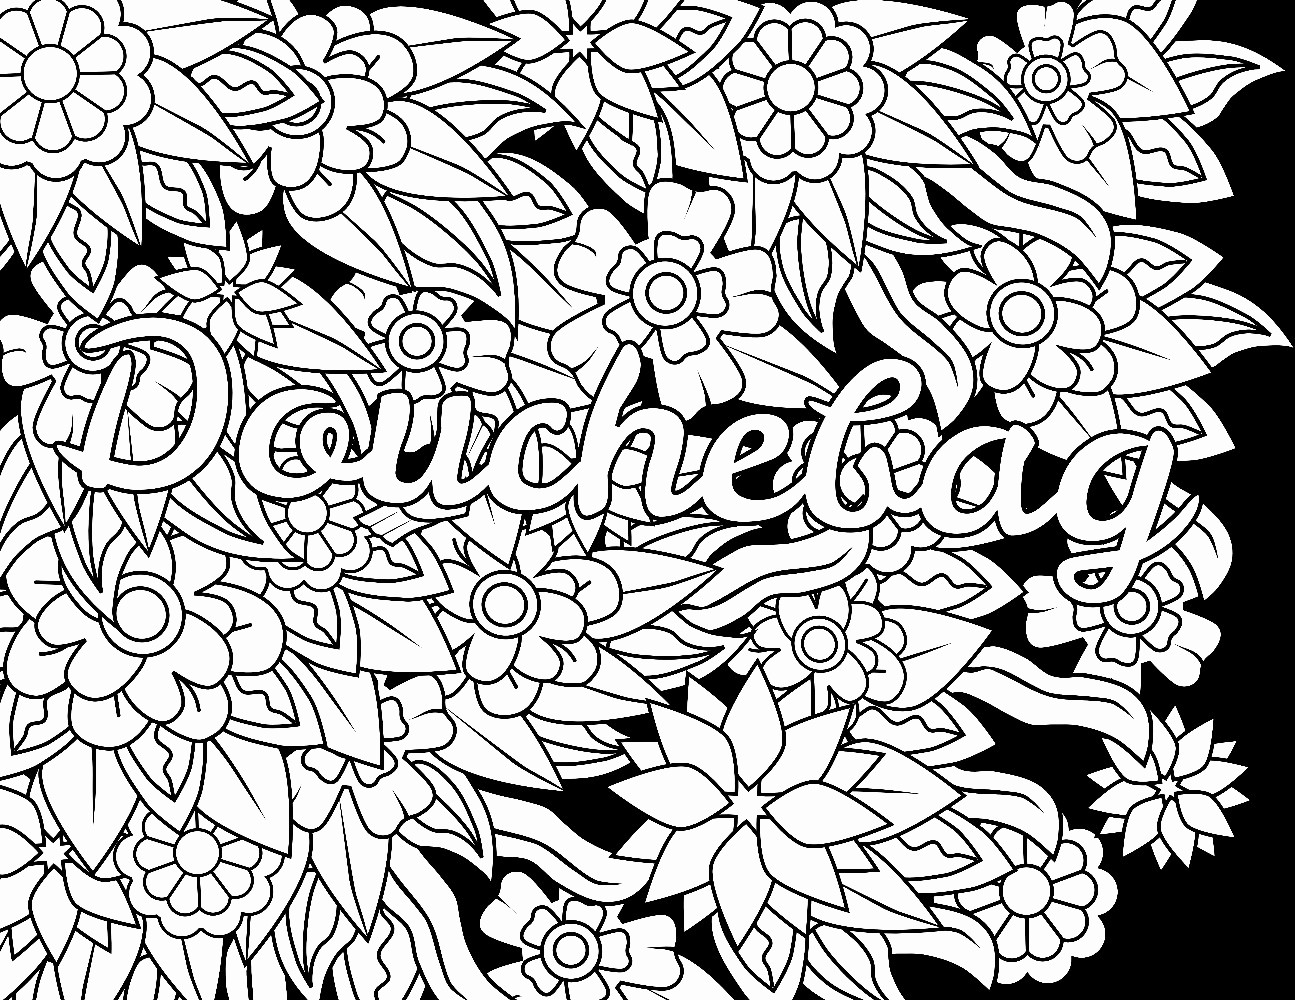 14 Fabulous Vase with Hearts 2024 free download vase with hearts of printable coloring pages flowers cool vases flower vase coloring for printable coloring pages flowers cool vases flower vase coloring page pages flowers in a top i